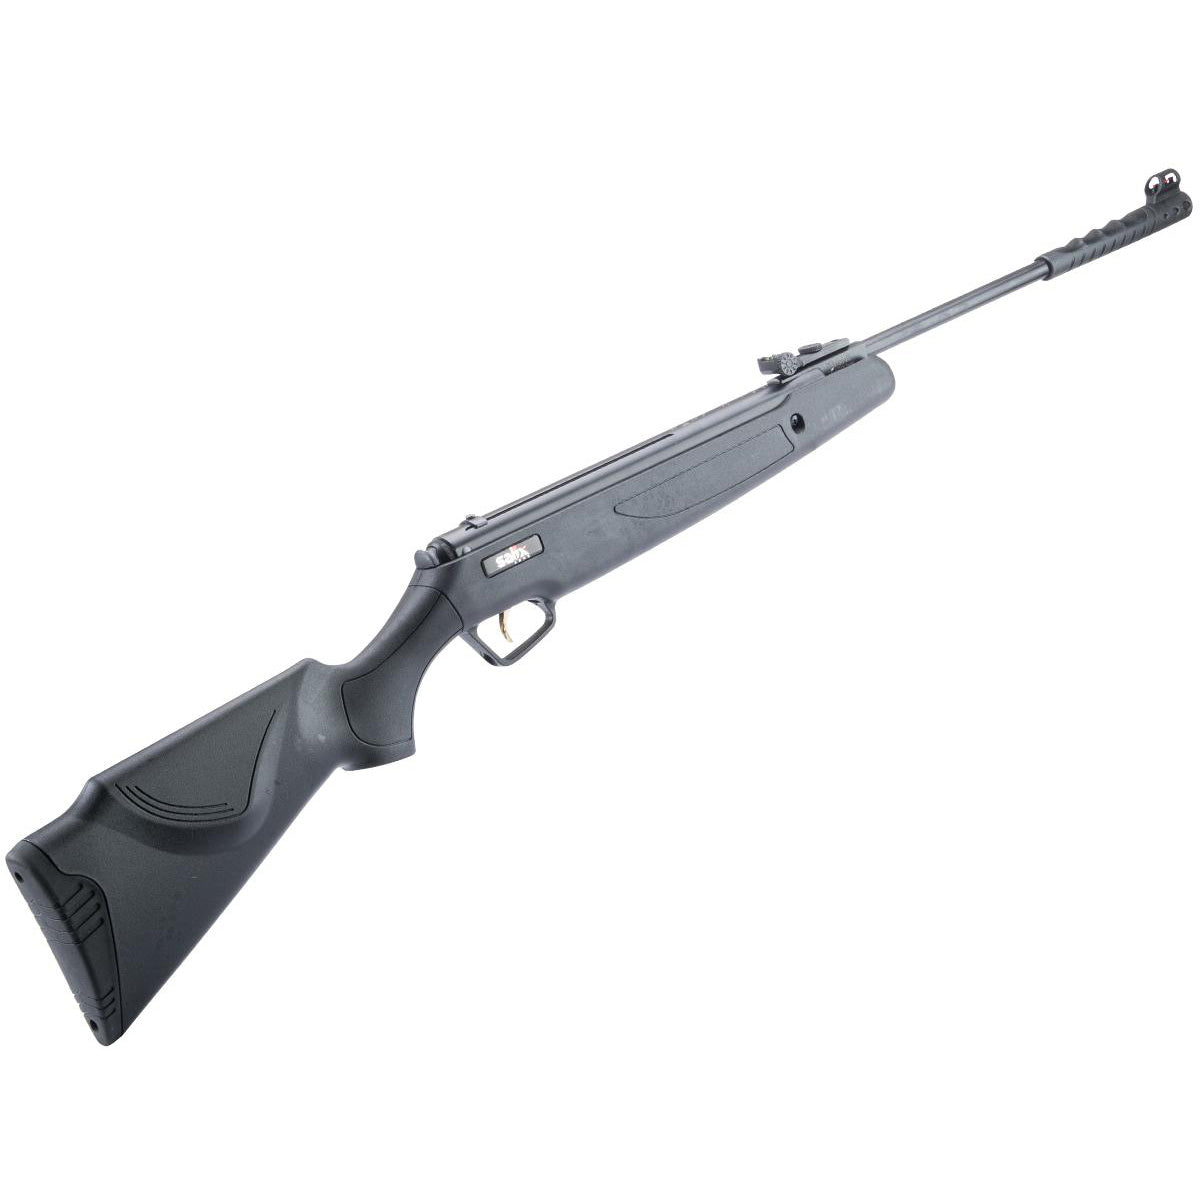 SALIX, TRIMEX ARMS TX01 BREAK BARREL SPRING AIR RIFLE WITH SYNTHETIC STOCK .22